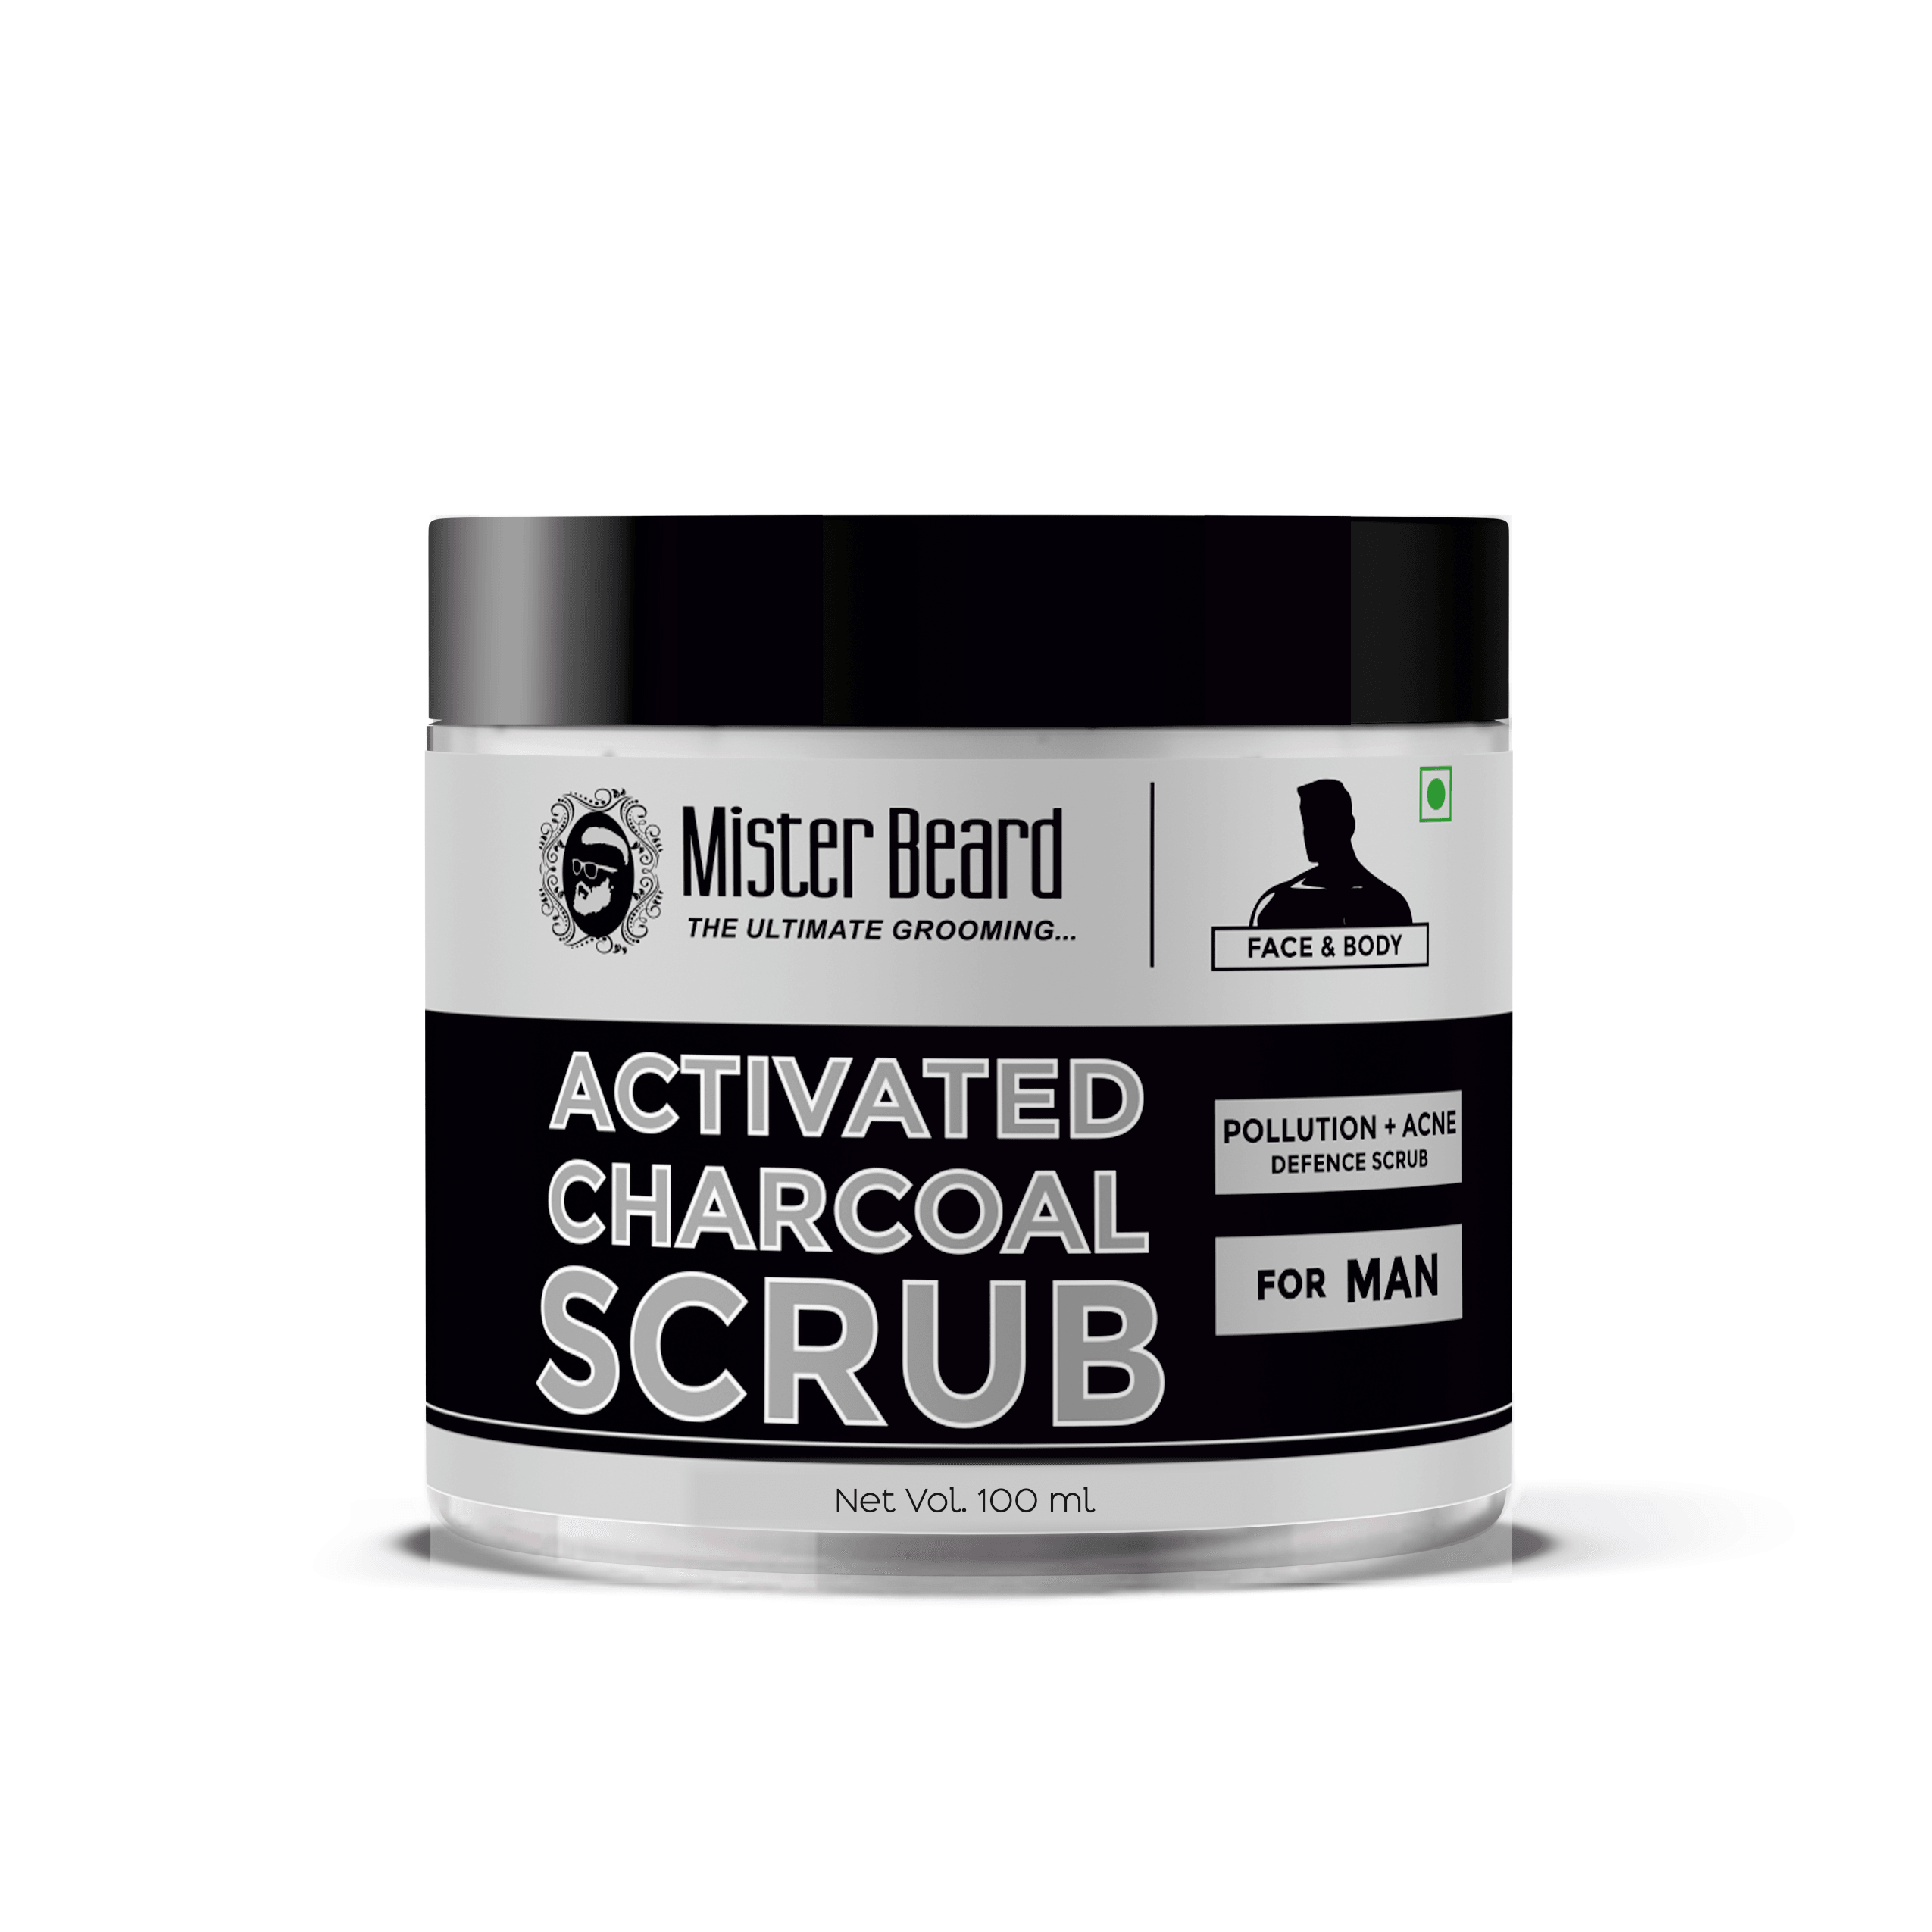 Mister Beard Activated Charcoal Scrub 100gm|For Deep Exfoliation | Dead Skin Remover | Tan Removal | Blackhead Remover Scrub - Pink Root